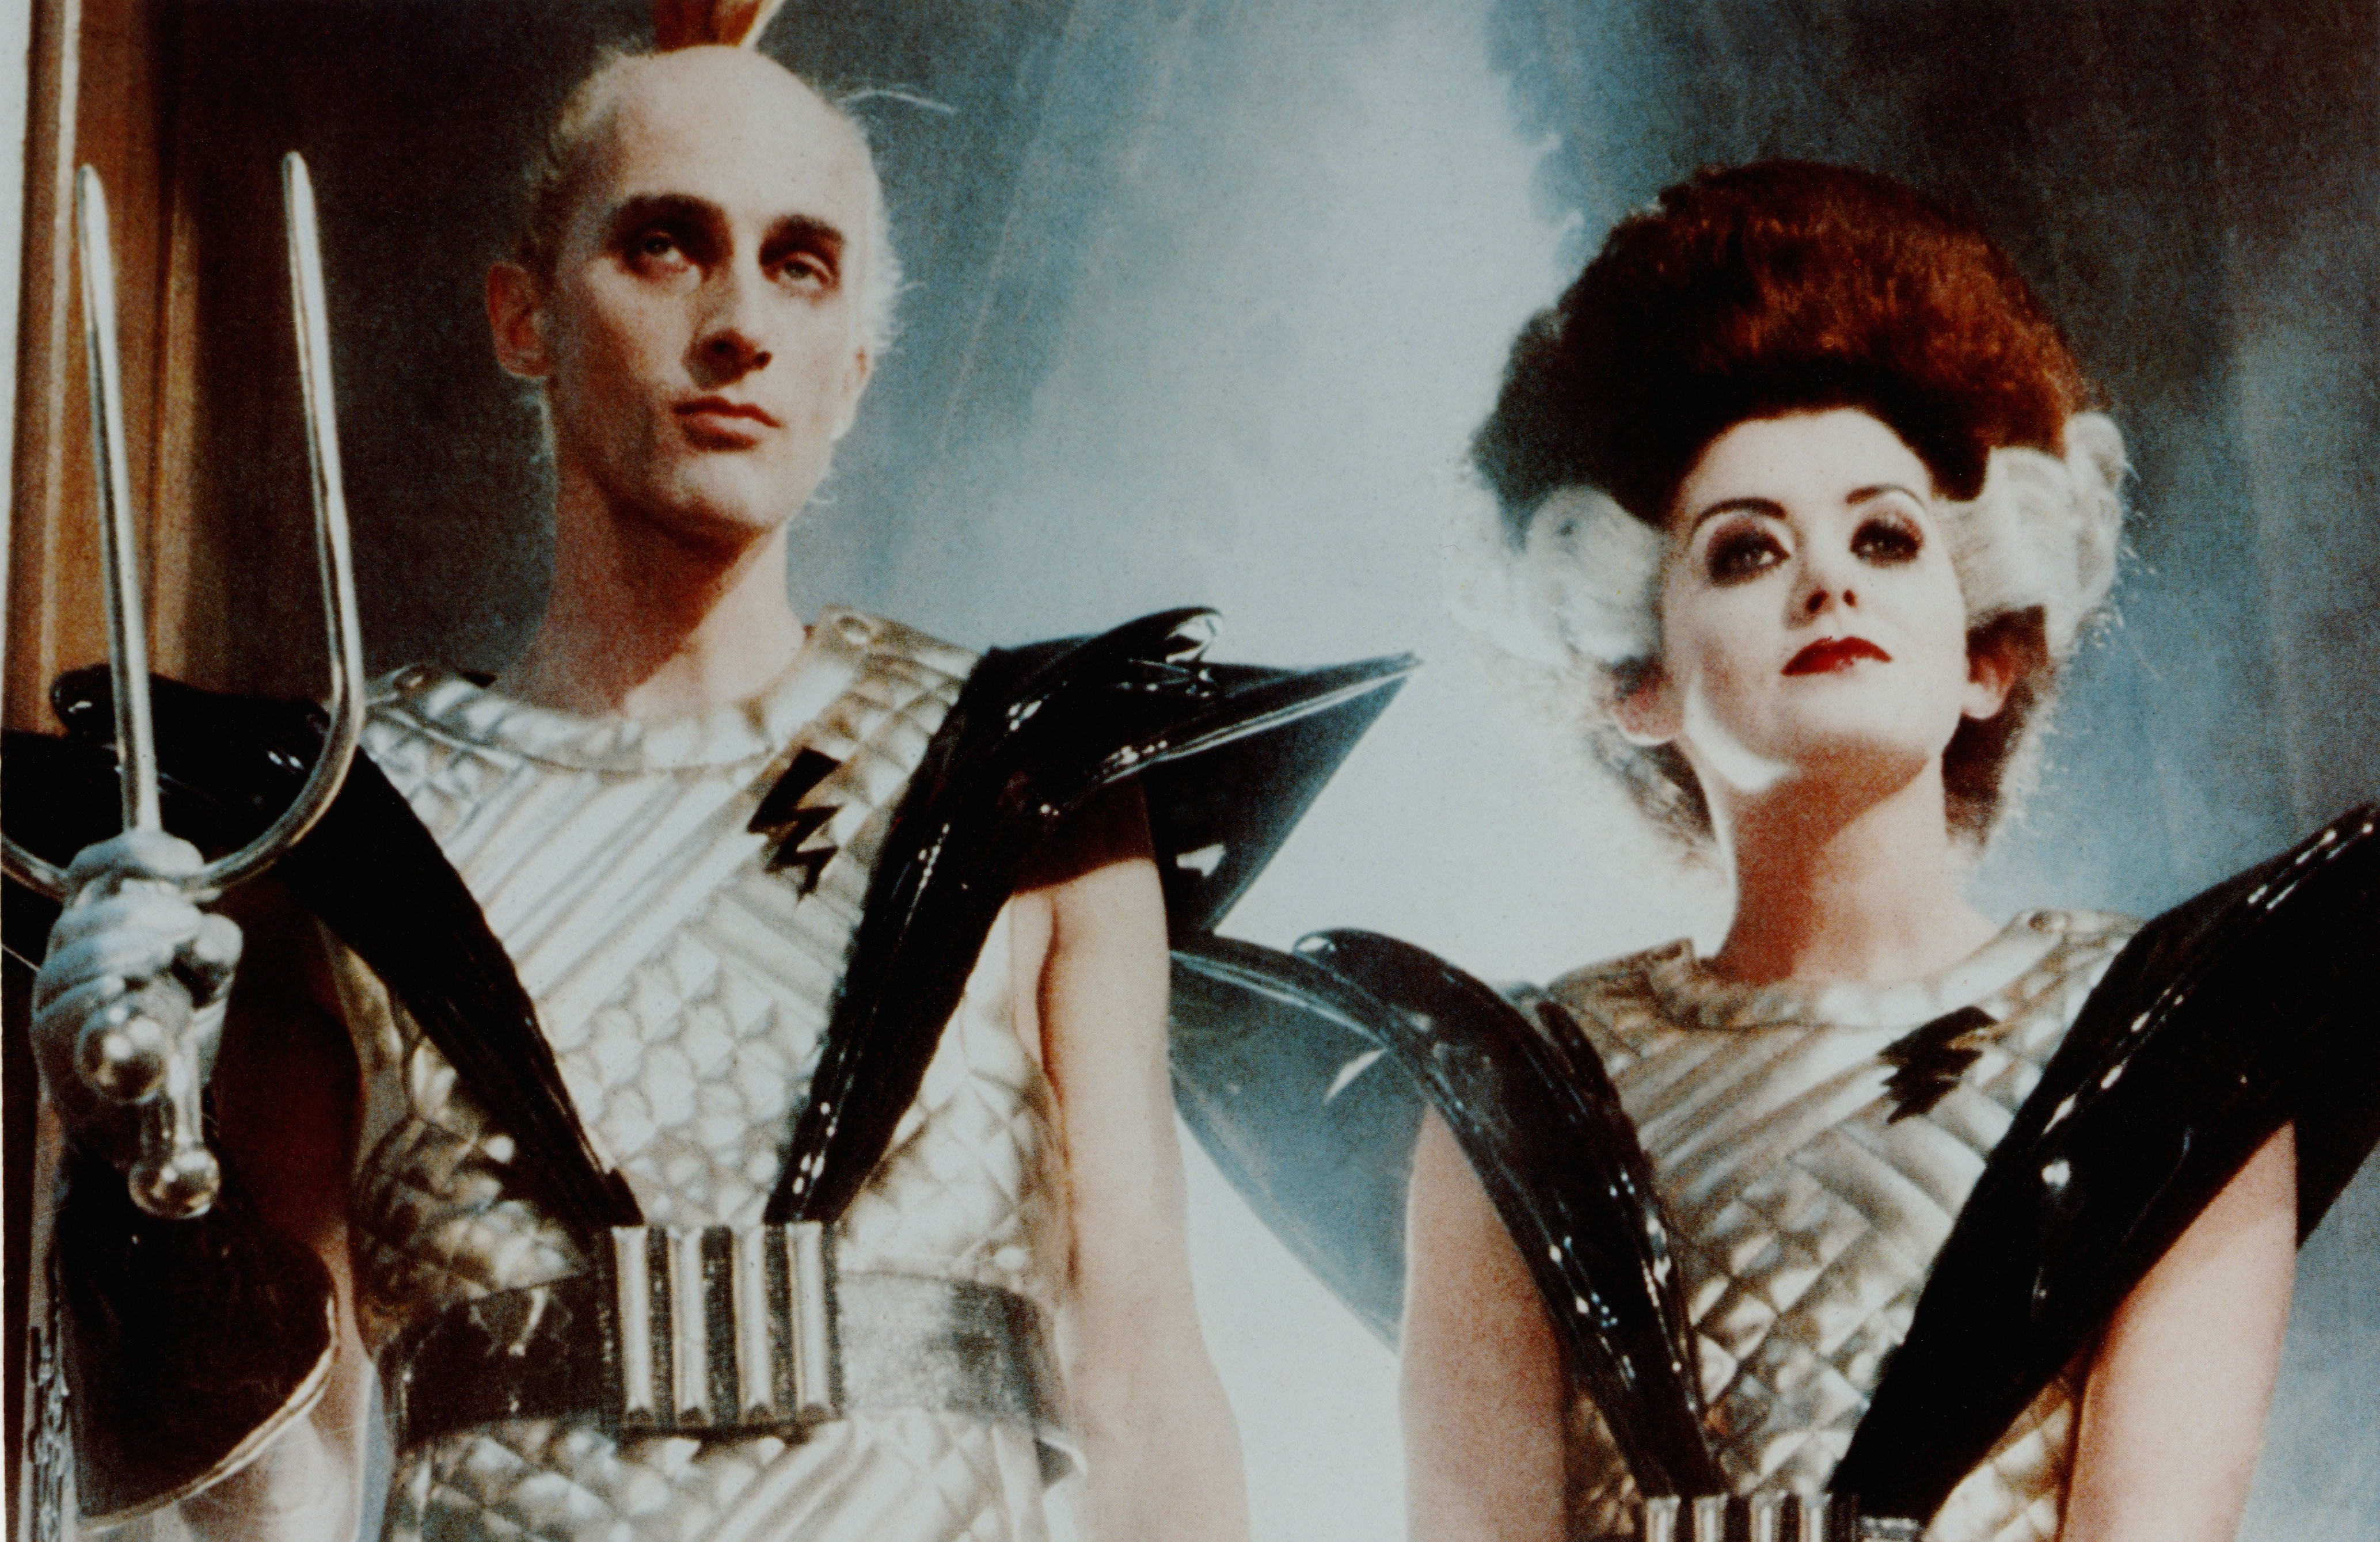 A still from the 1975 film version of The Rocky Horror Picture Show